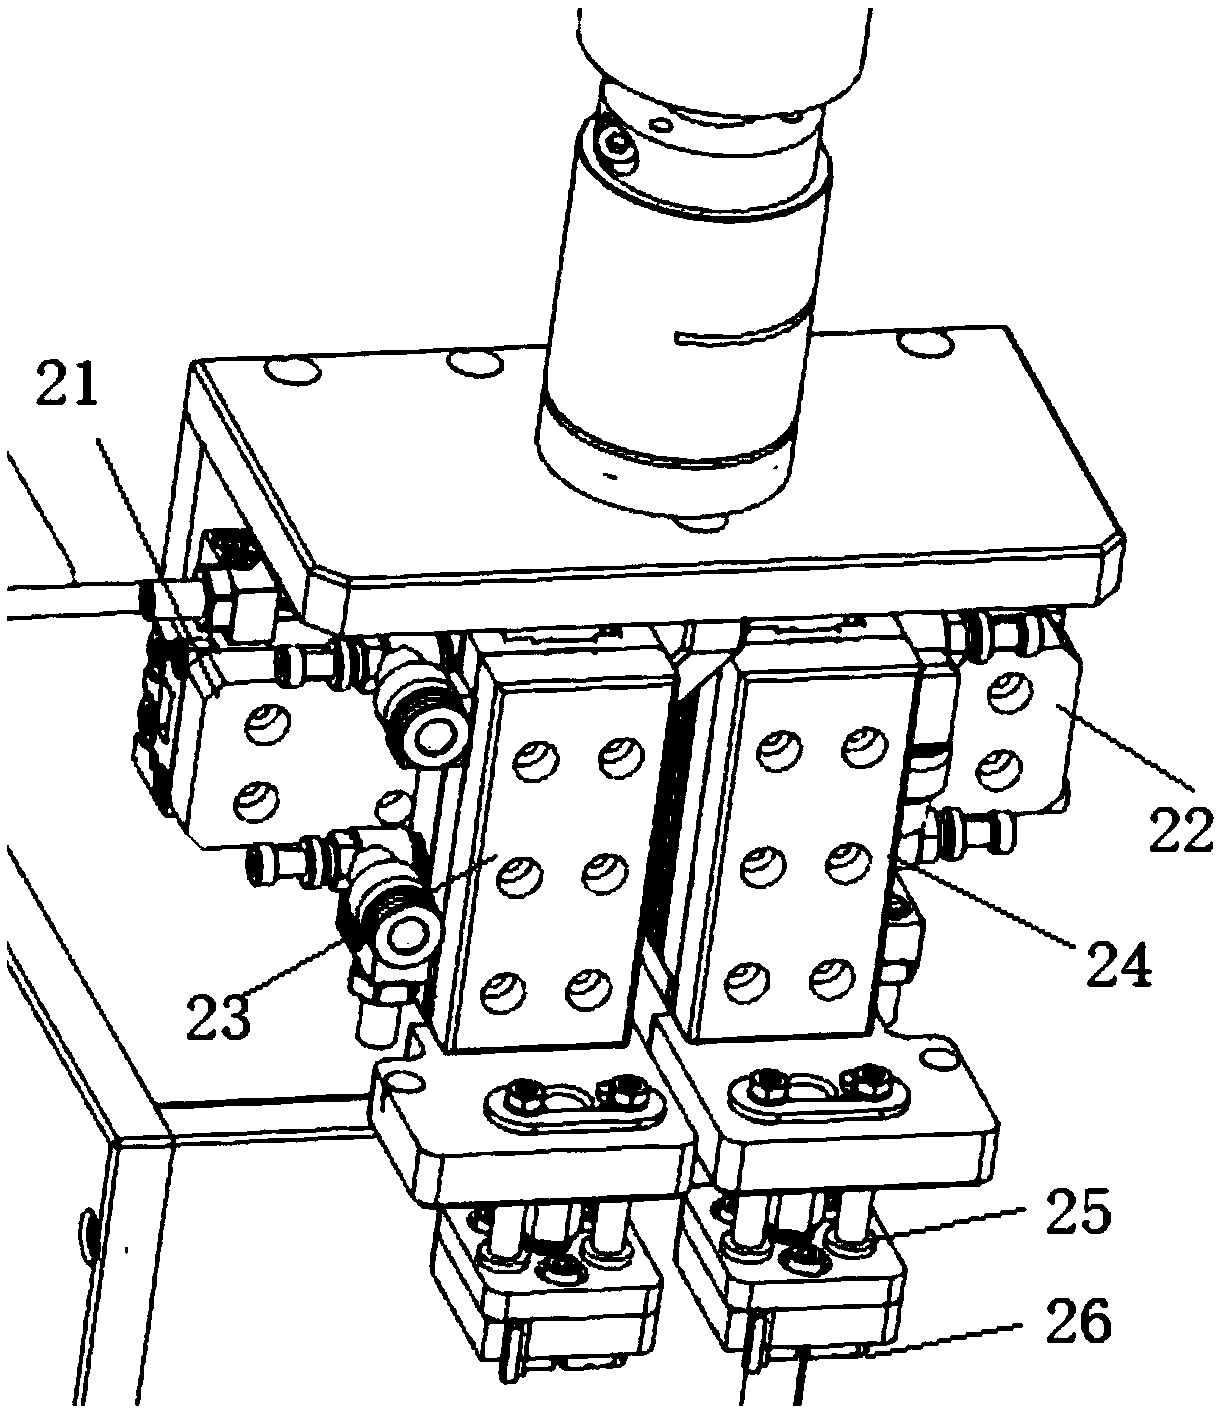 Automatic circulating feeding and material storing AOI detecting equipment